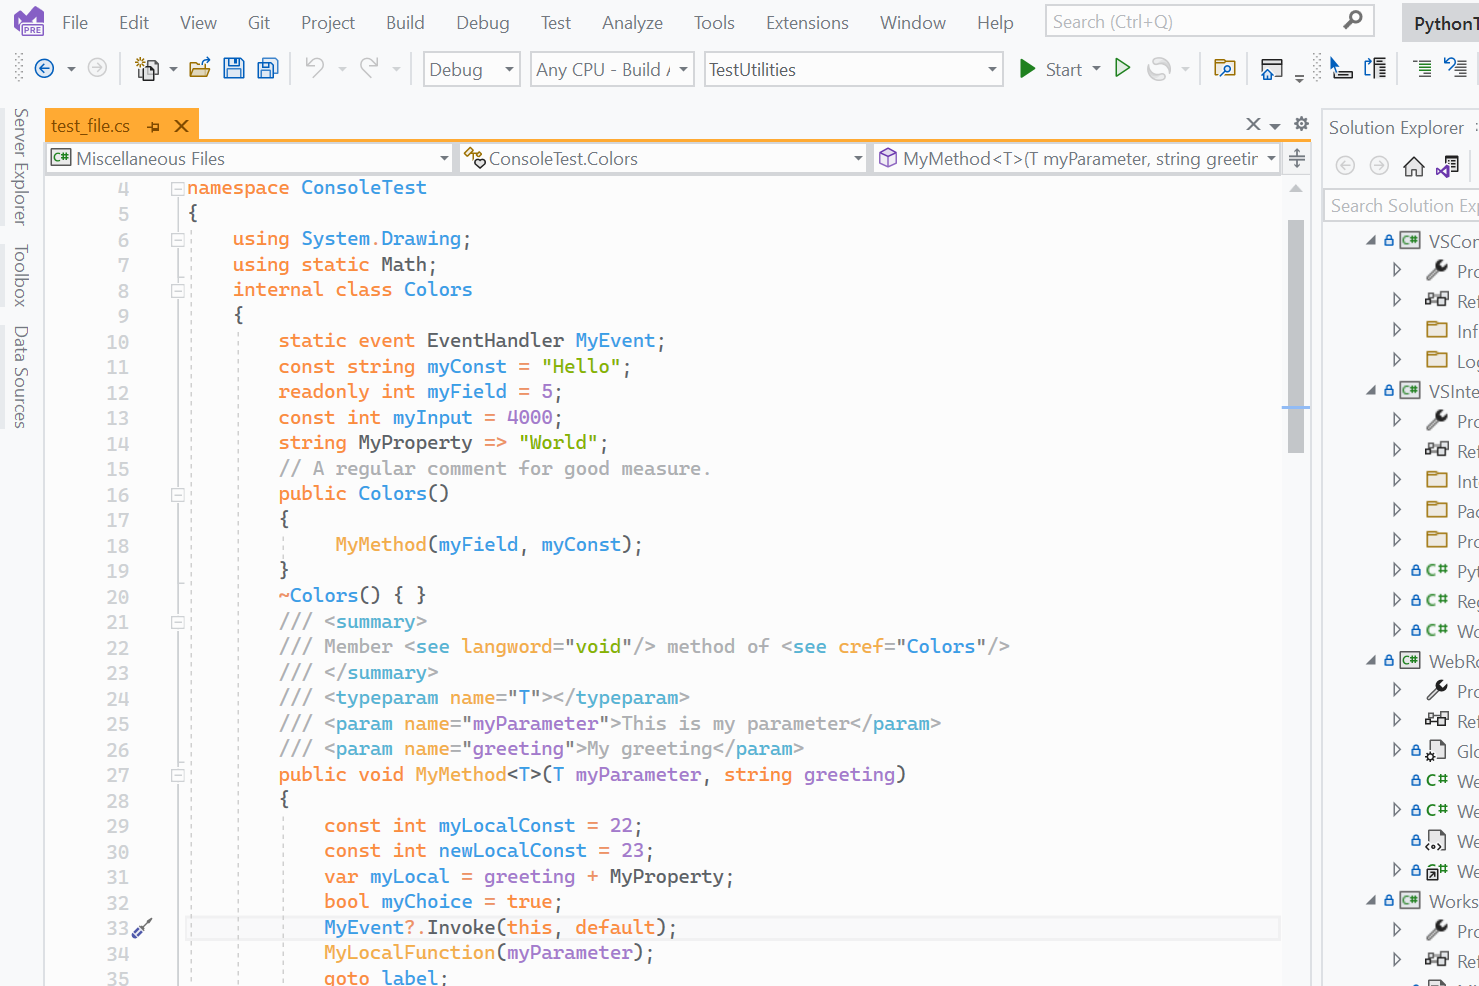 10 Visual Studio 2022 Themes you Should Try (Free Themes!)